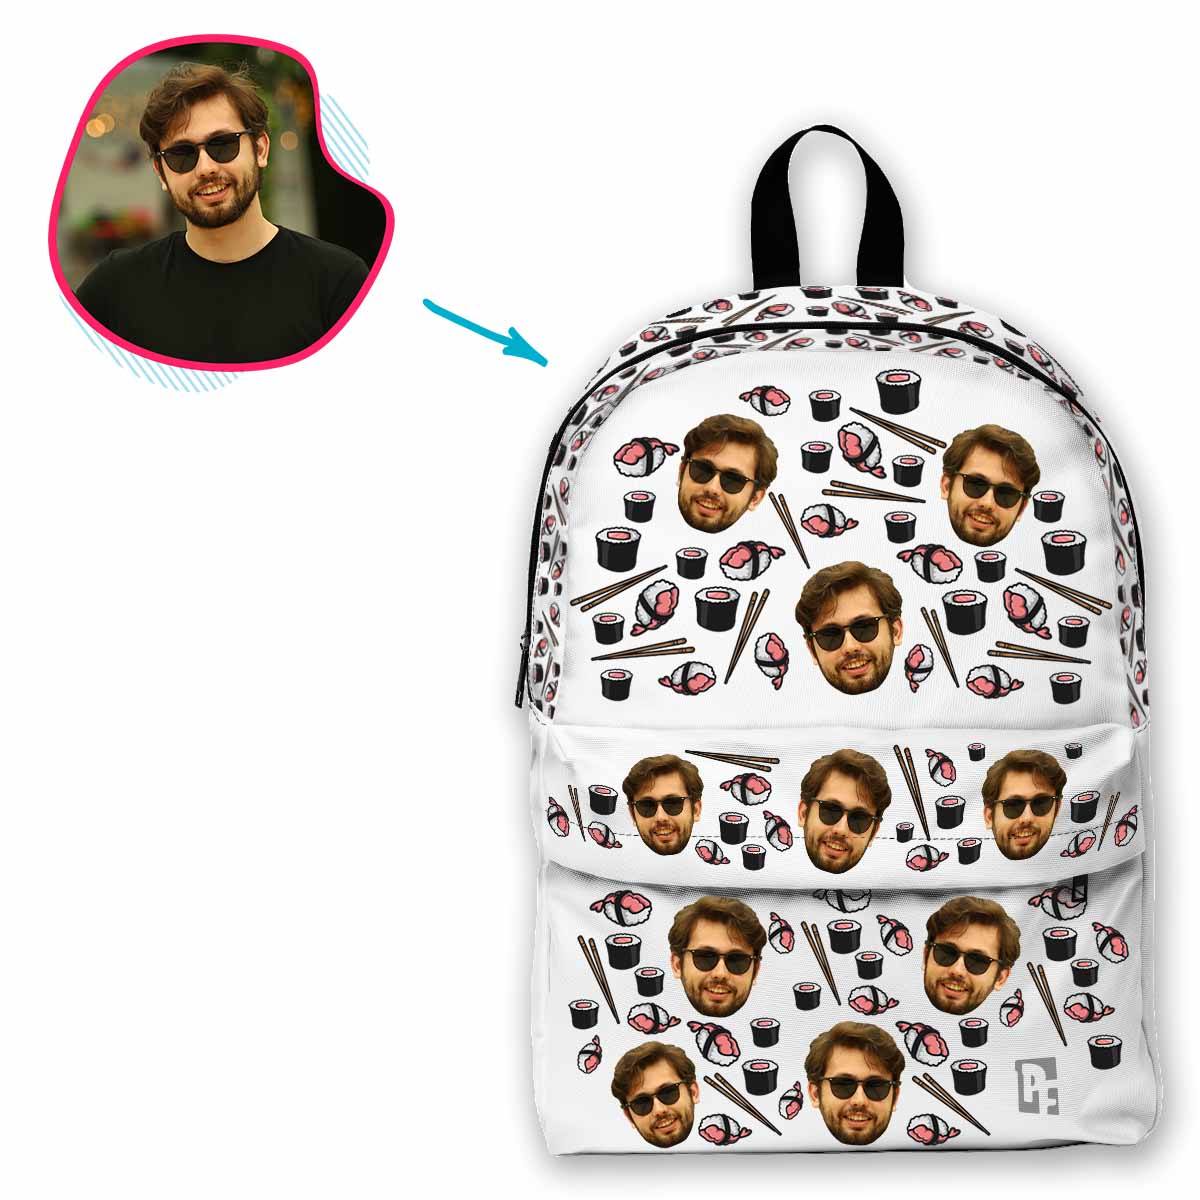 white Sushi classic backpack personalized with photo of face printed on it